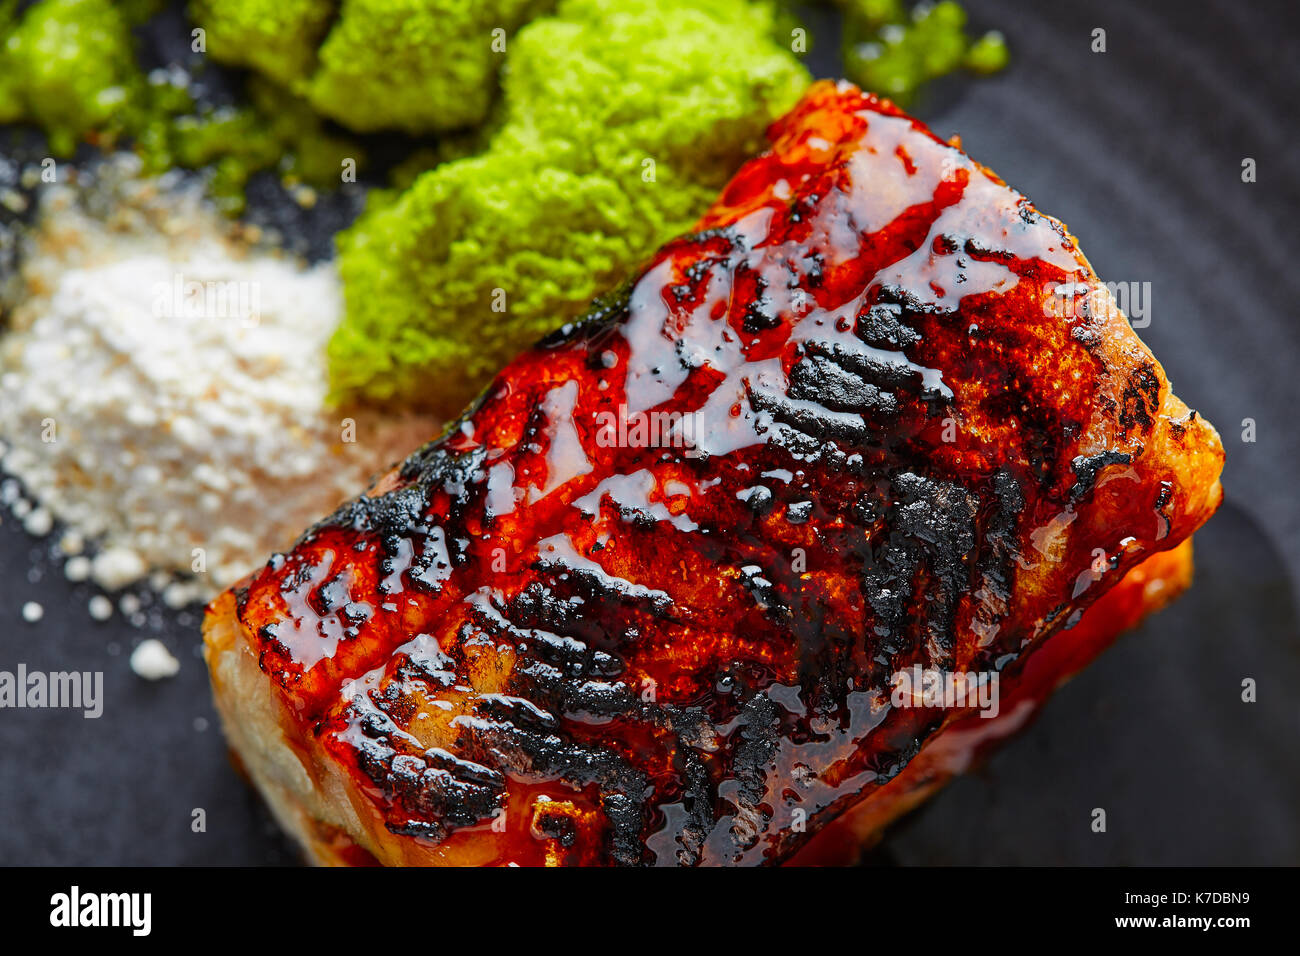 Grilled smoked eel with green apple and citrus on black plate Stock Photo